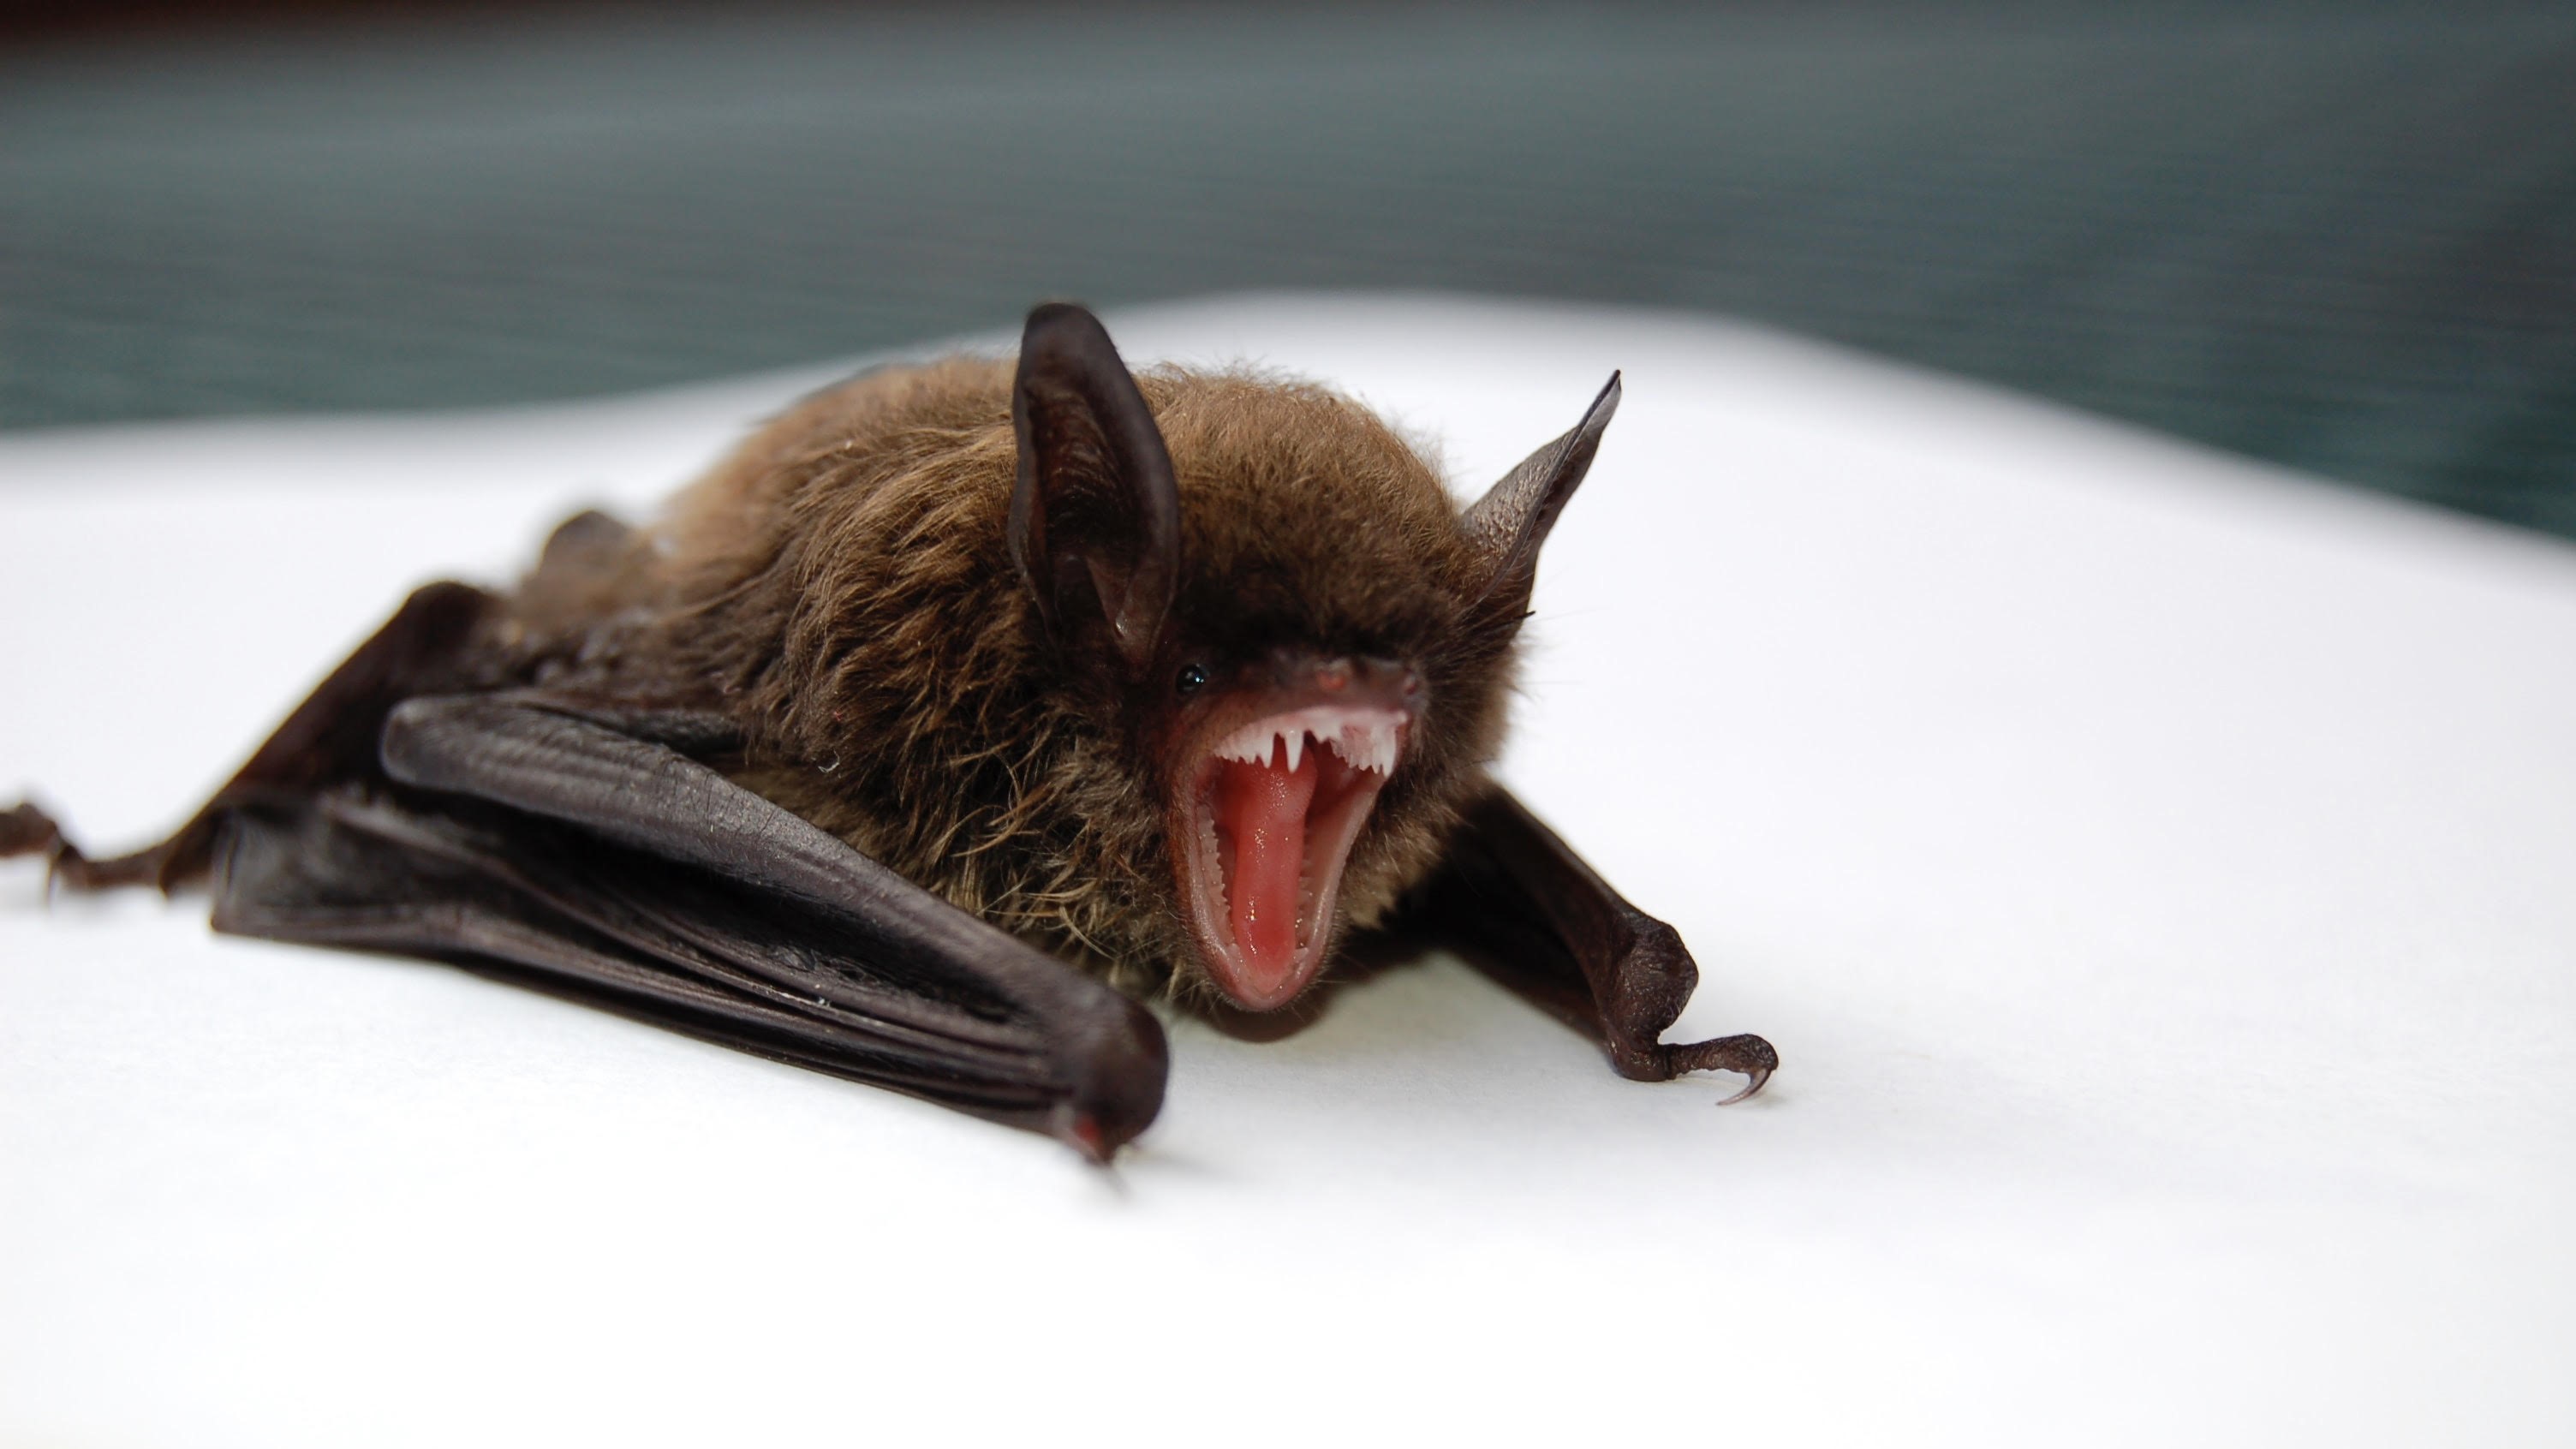 A photo of a bat with an open mouth